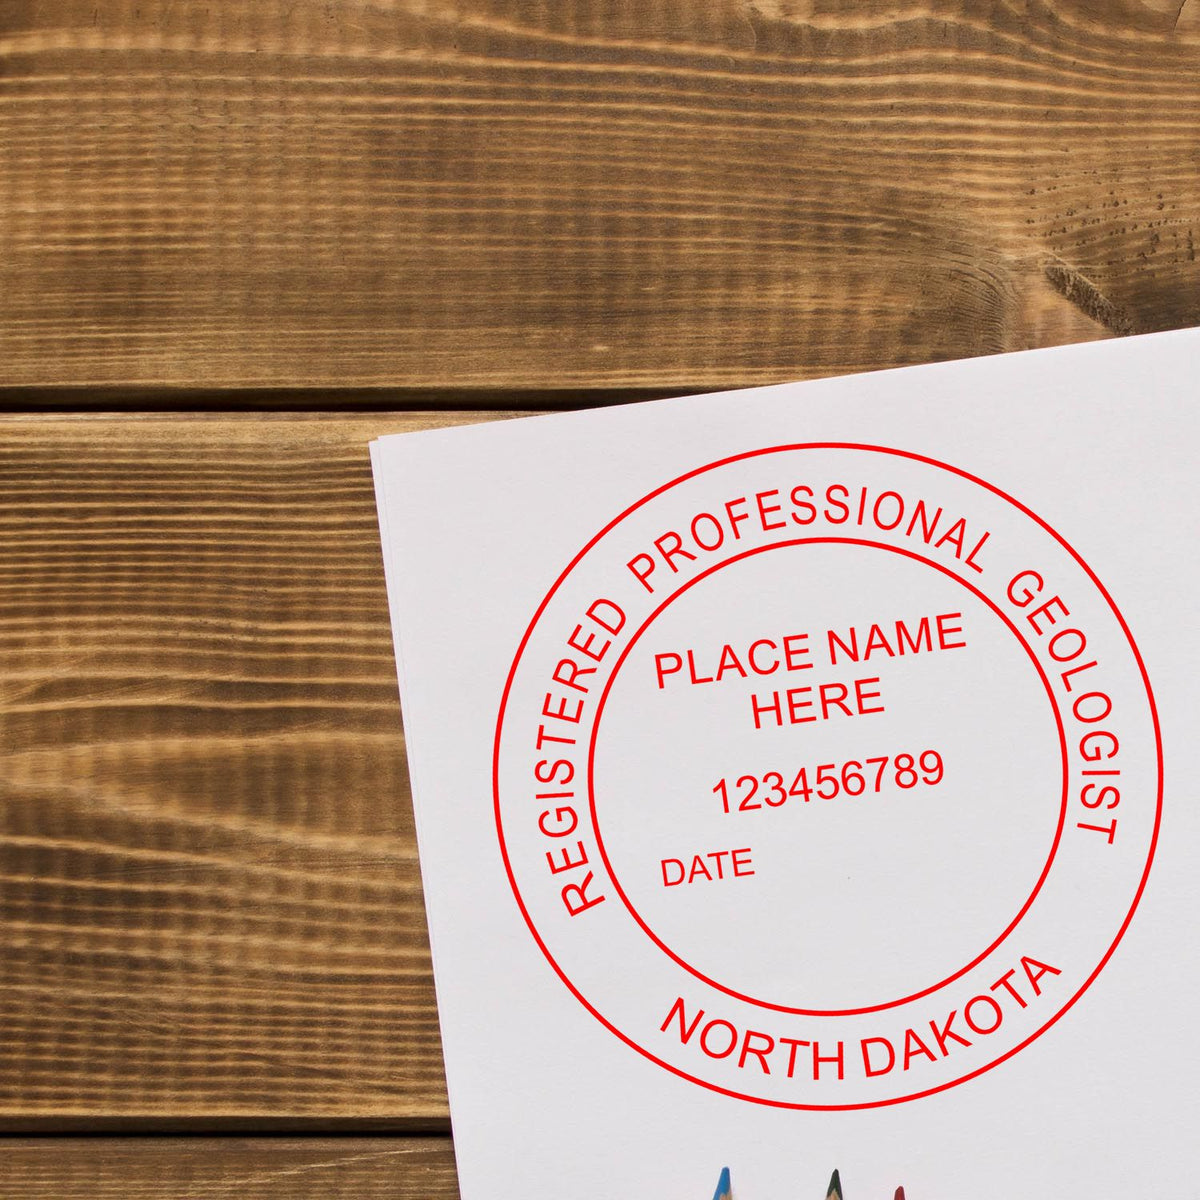 The Digital North Dakota Geologist Stamp, Electronic Seal for North Dakota Geologist stamp impression comes to life with a crisp, detailed image stamped on paper - showcasing true professional quality.